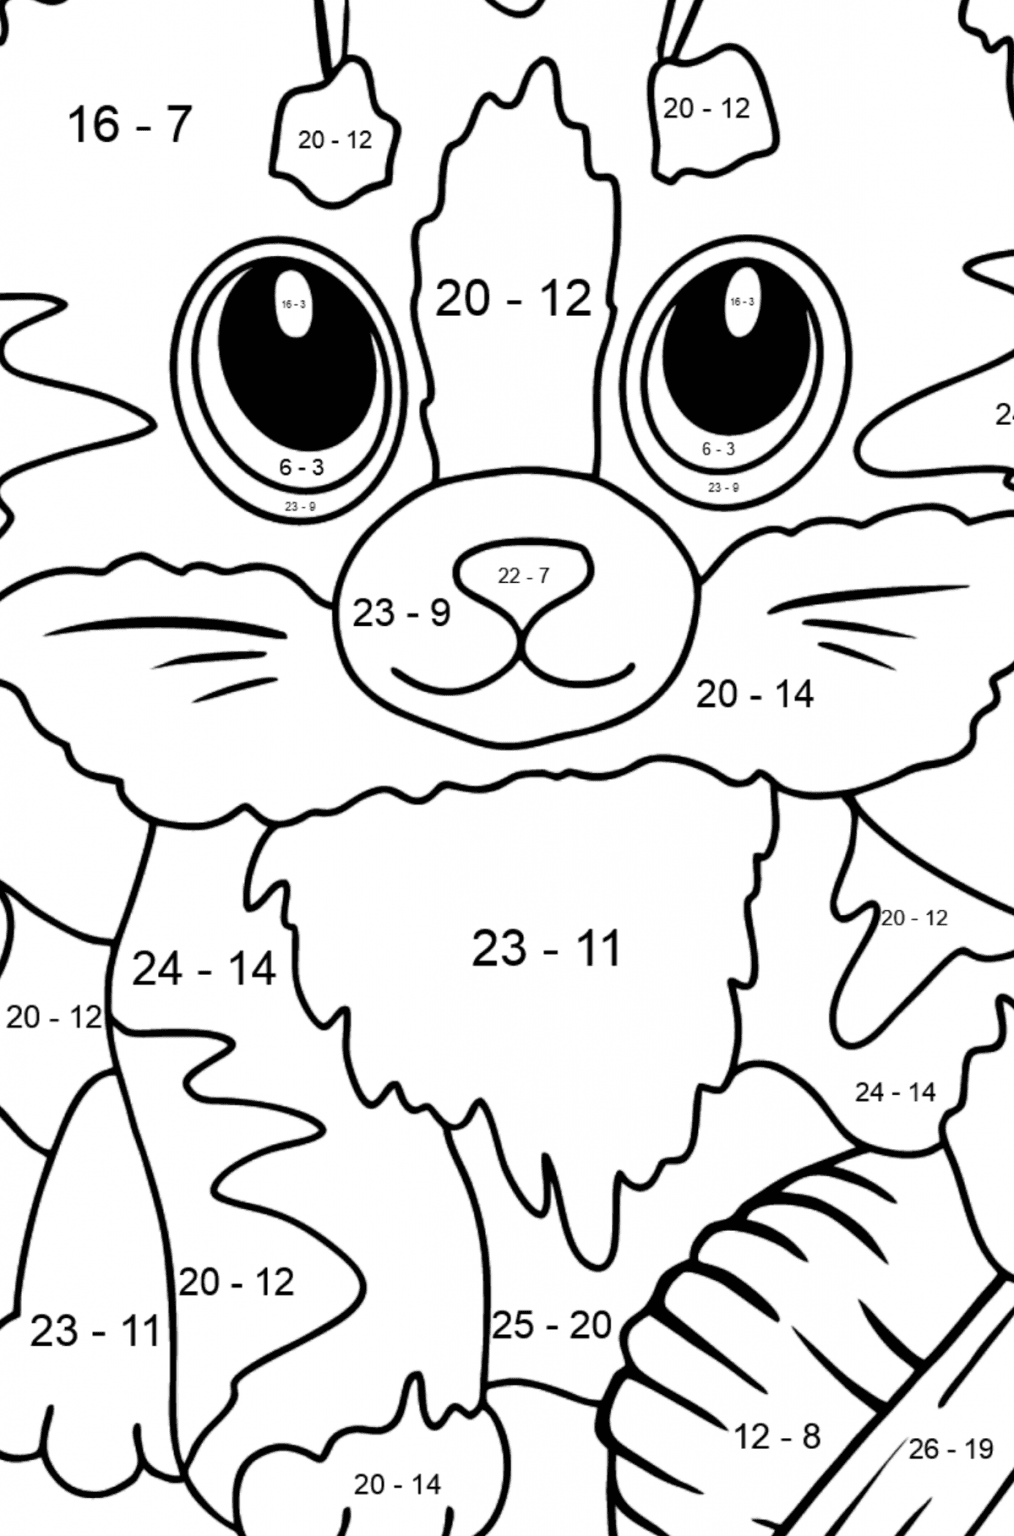 Kitten Yarn Ball Coloring Page ♥ Online and Print for Free!